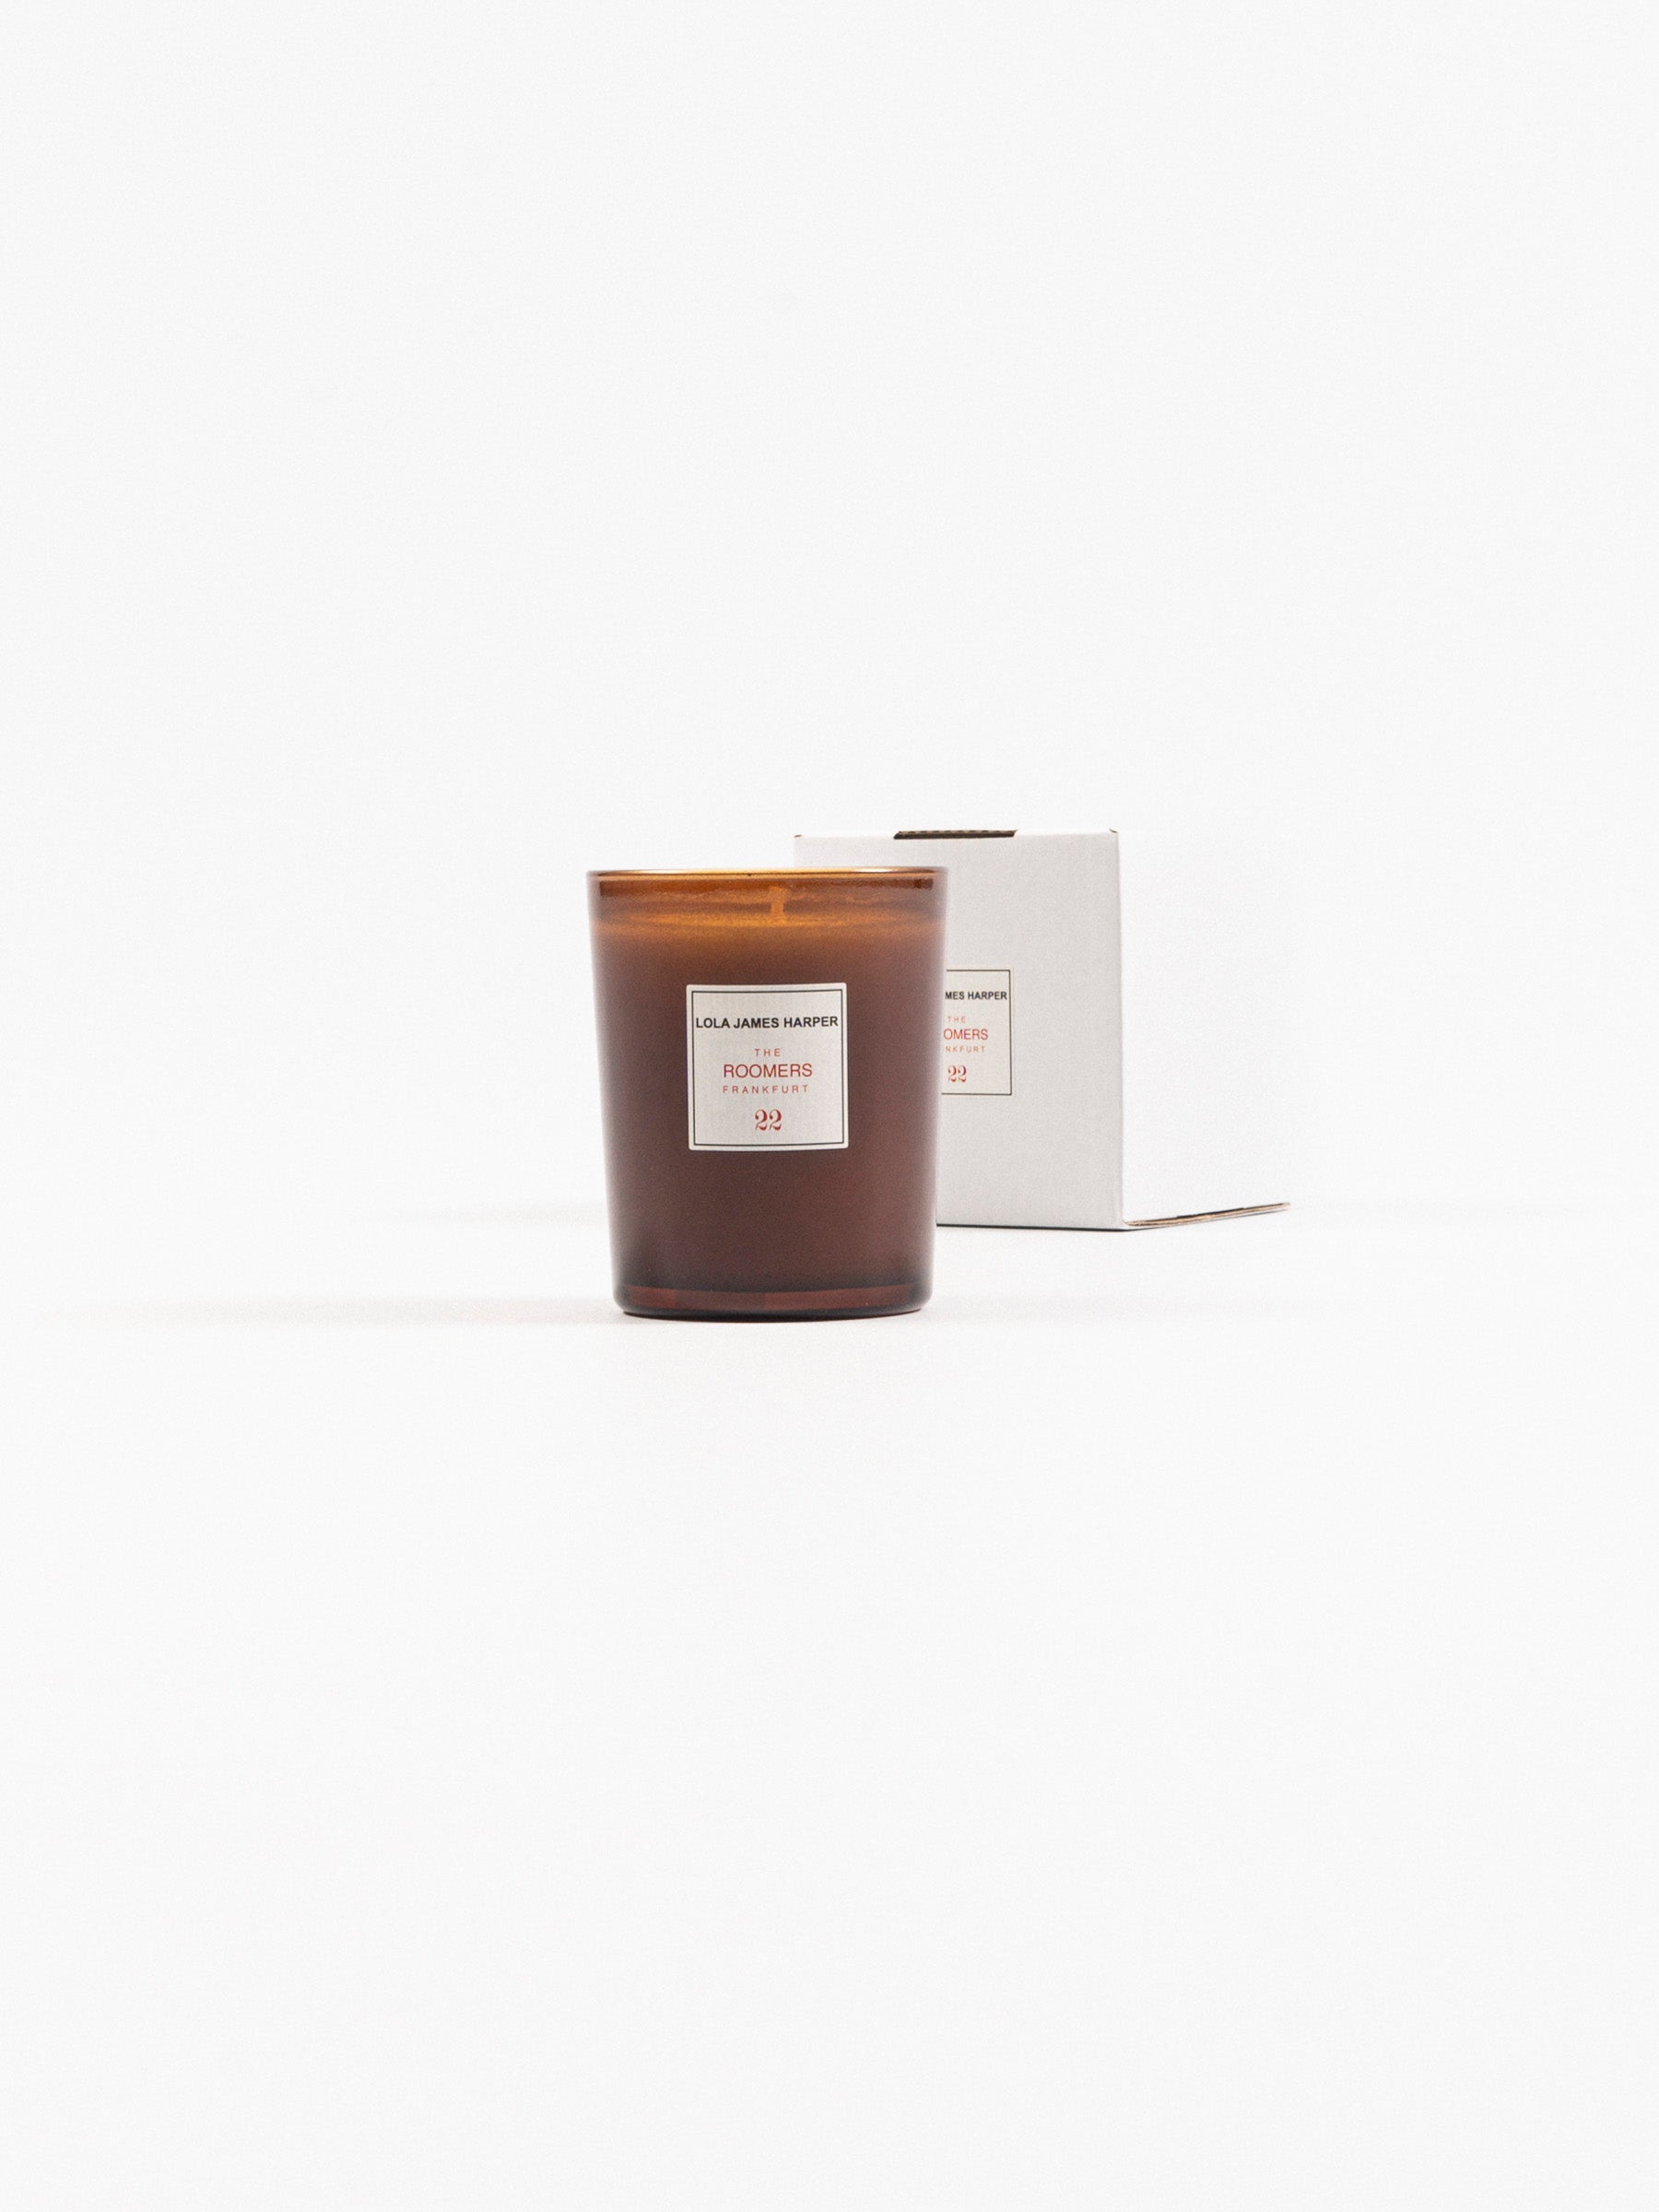 Roomers Frankfurt Scent Candle